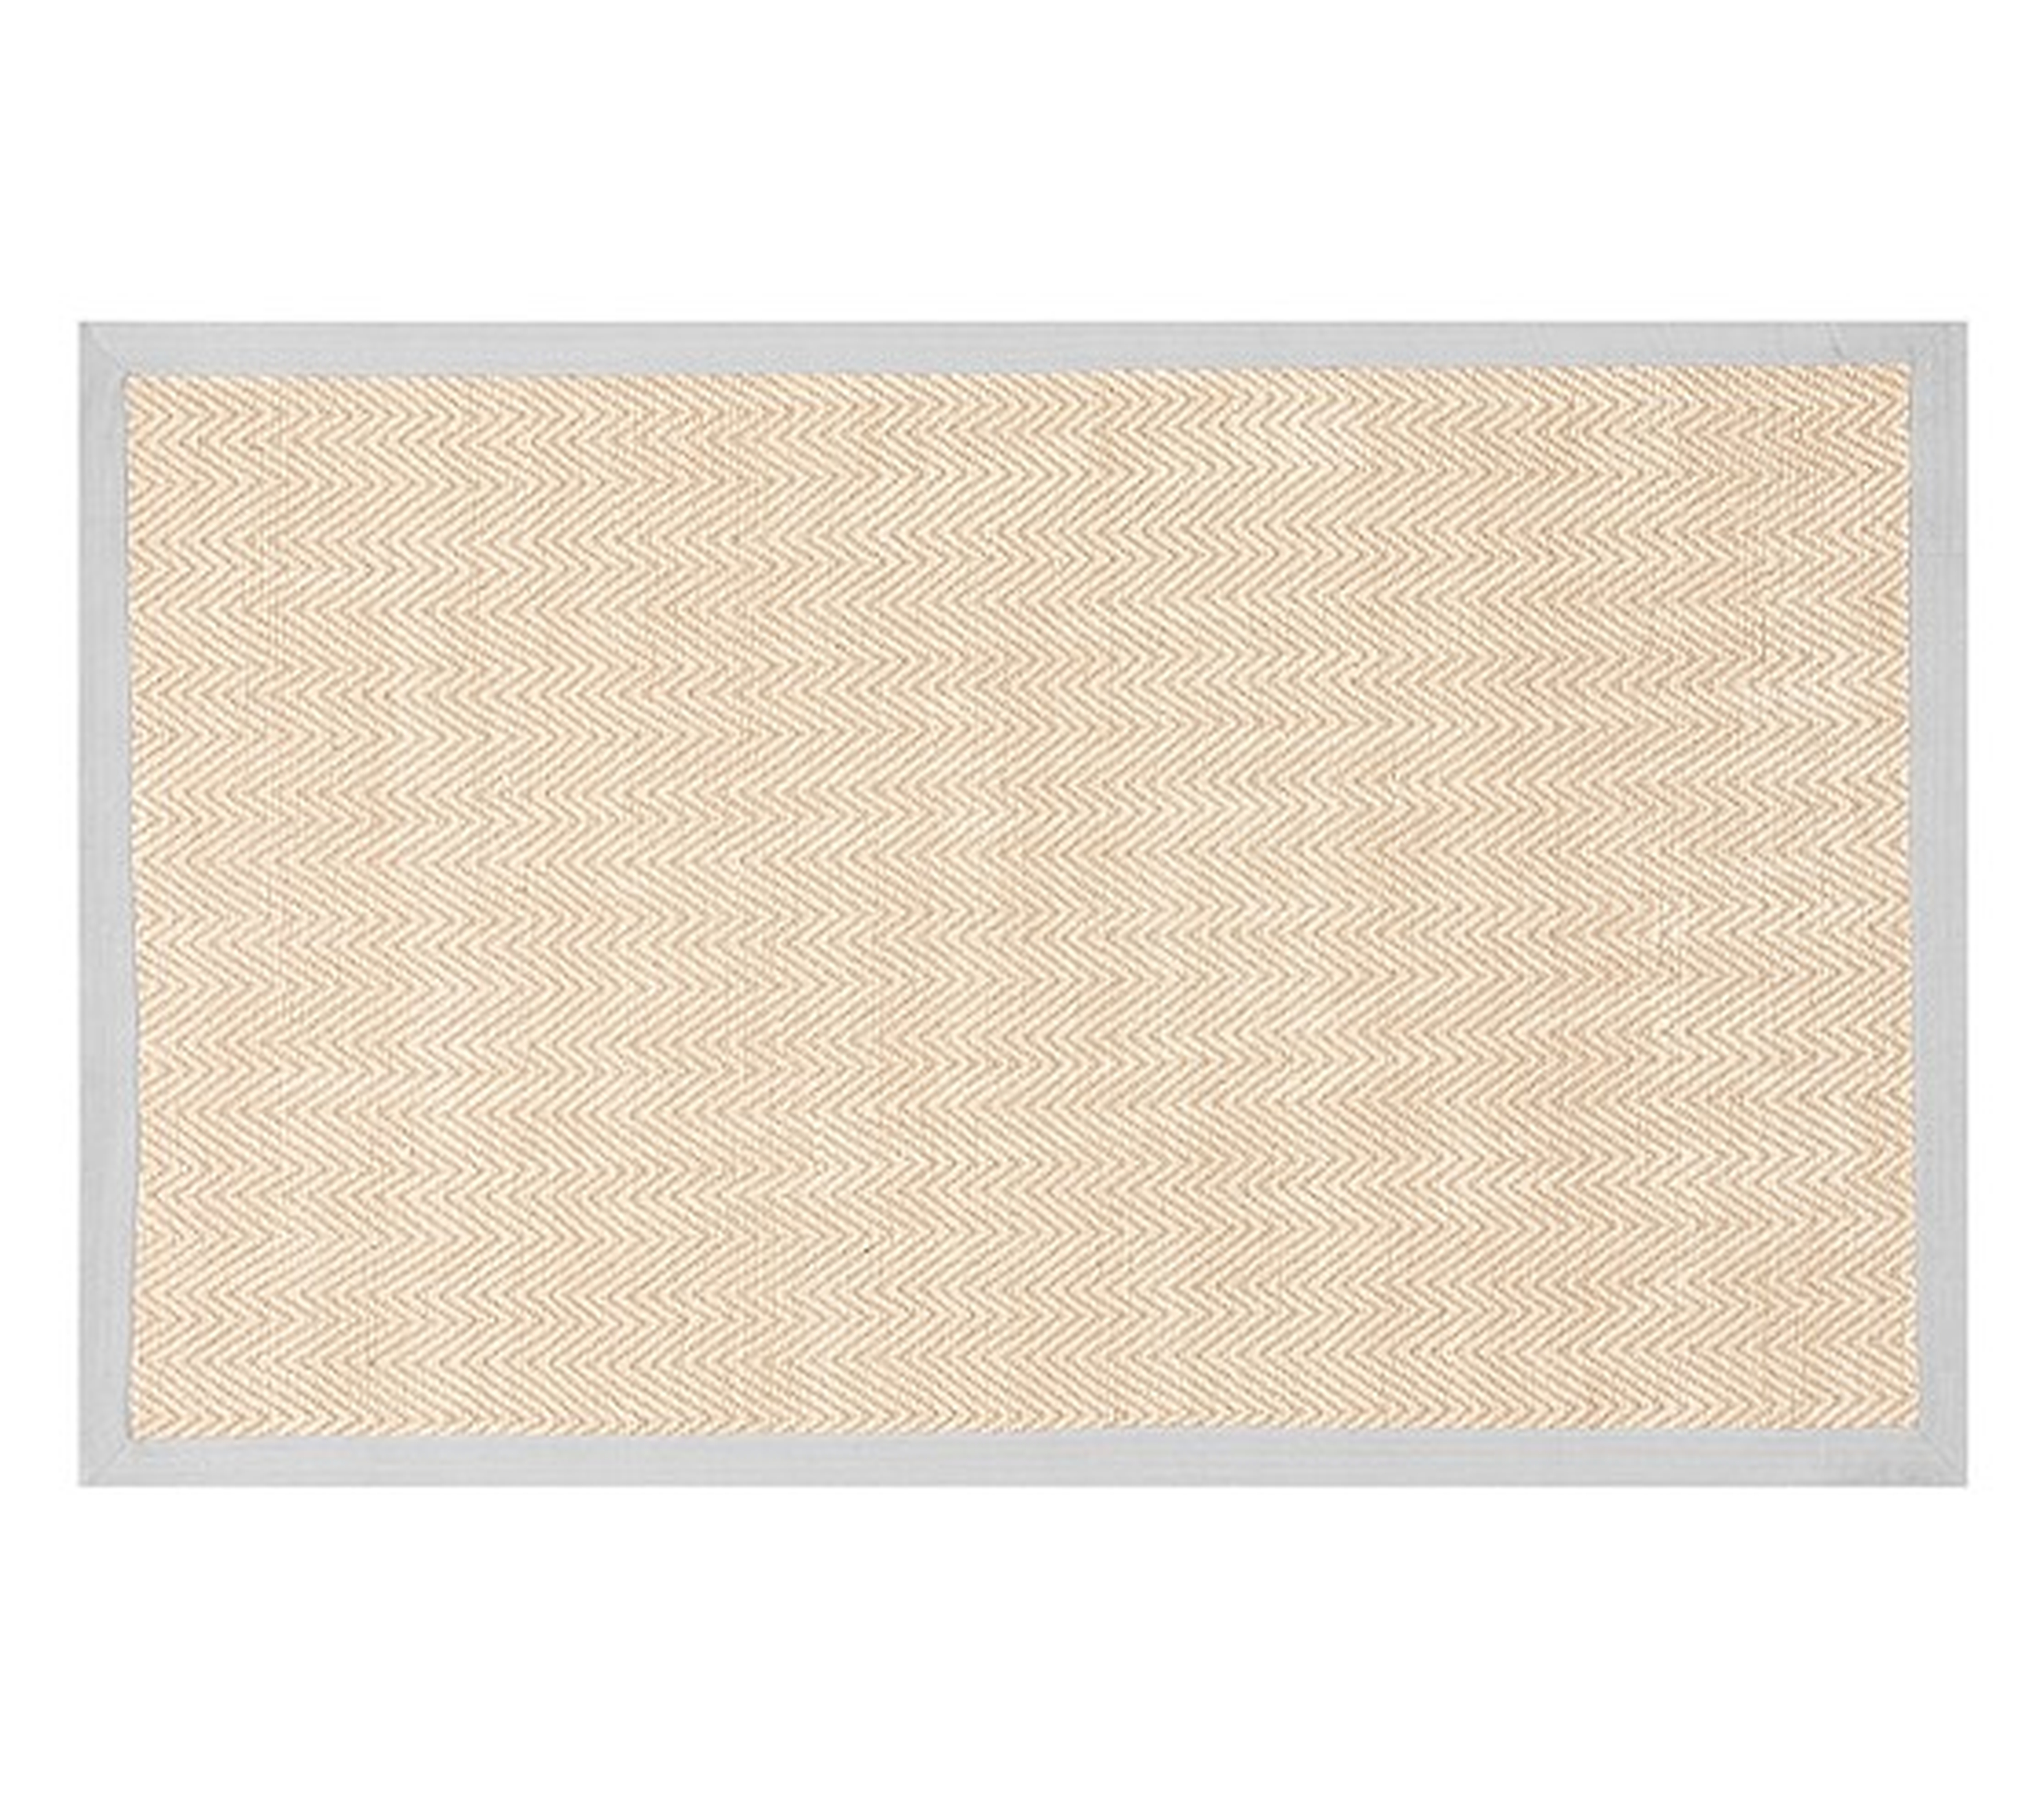 Chenille Jute Thick Solid Border Rug, Gray, 5x8' - Pottery Barn Kids